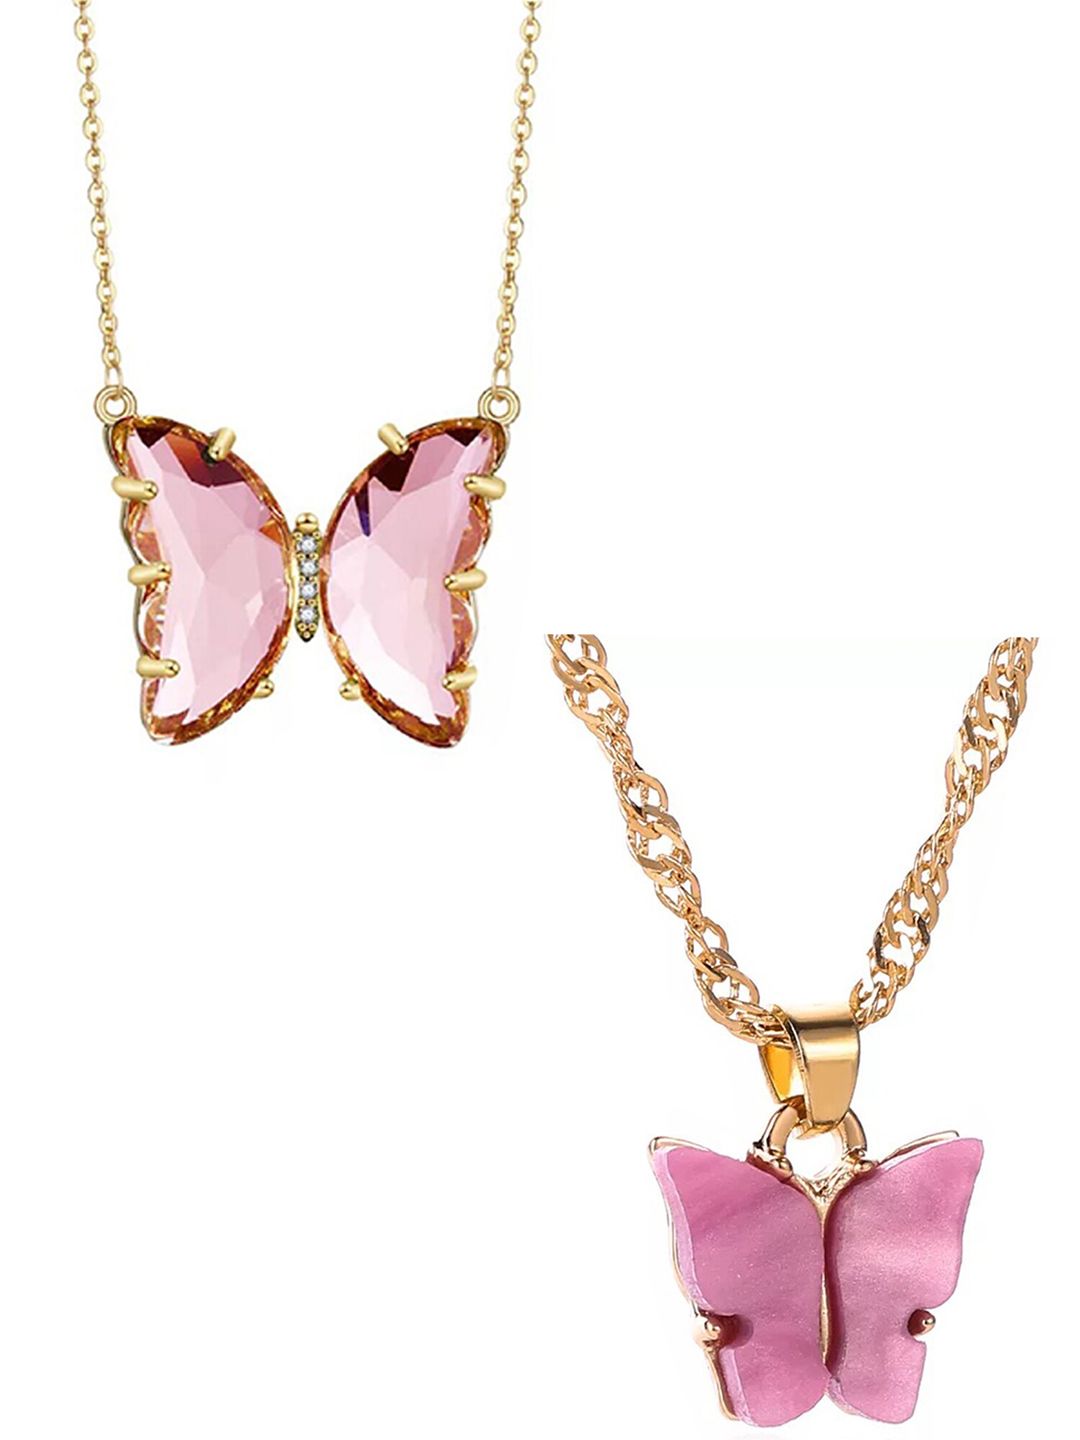 Vembley Set of 2 Gold-Plated Pink CZ Studded Butterfly Pendant Necklaces Price in India